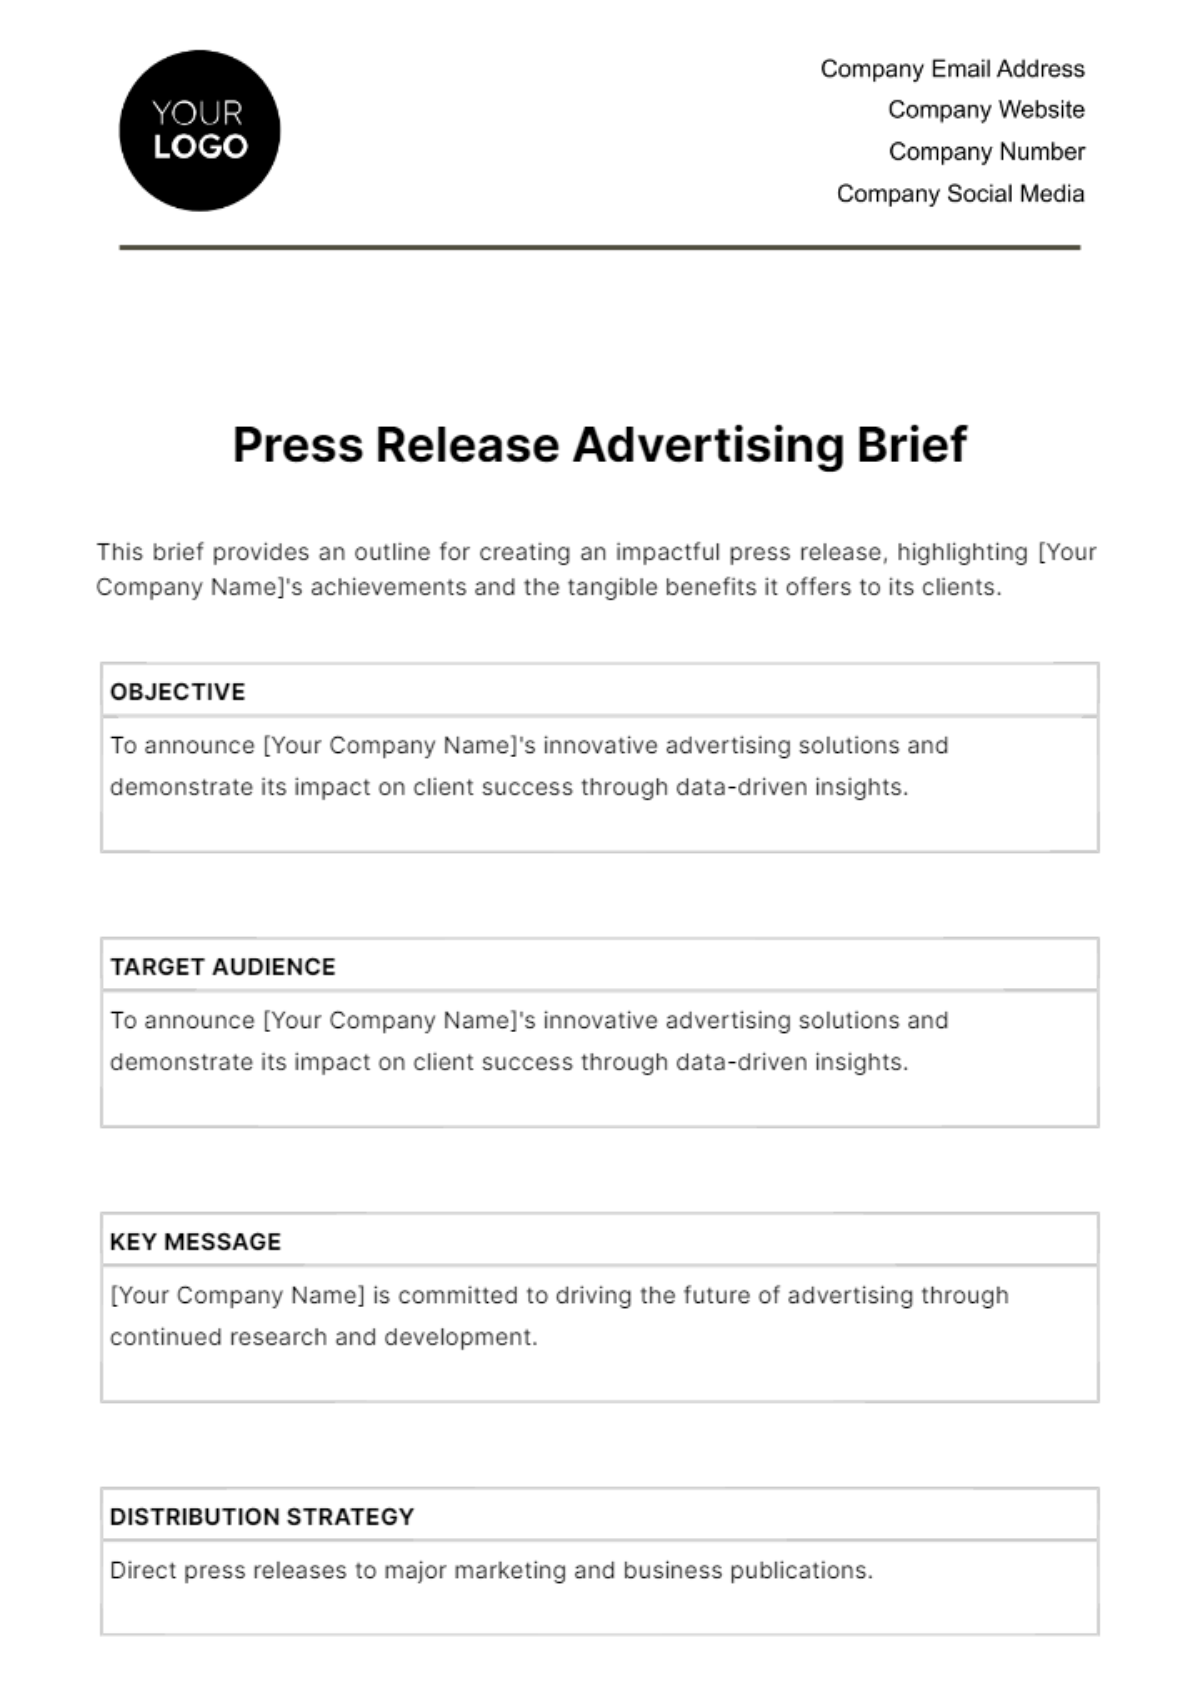 Press Release Advertising Brief Template